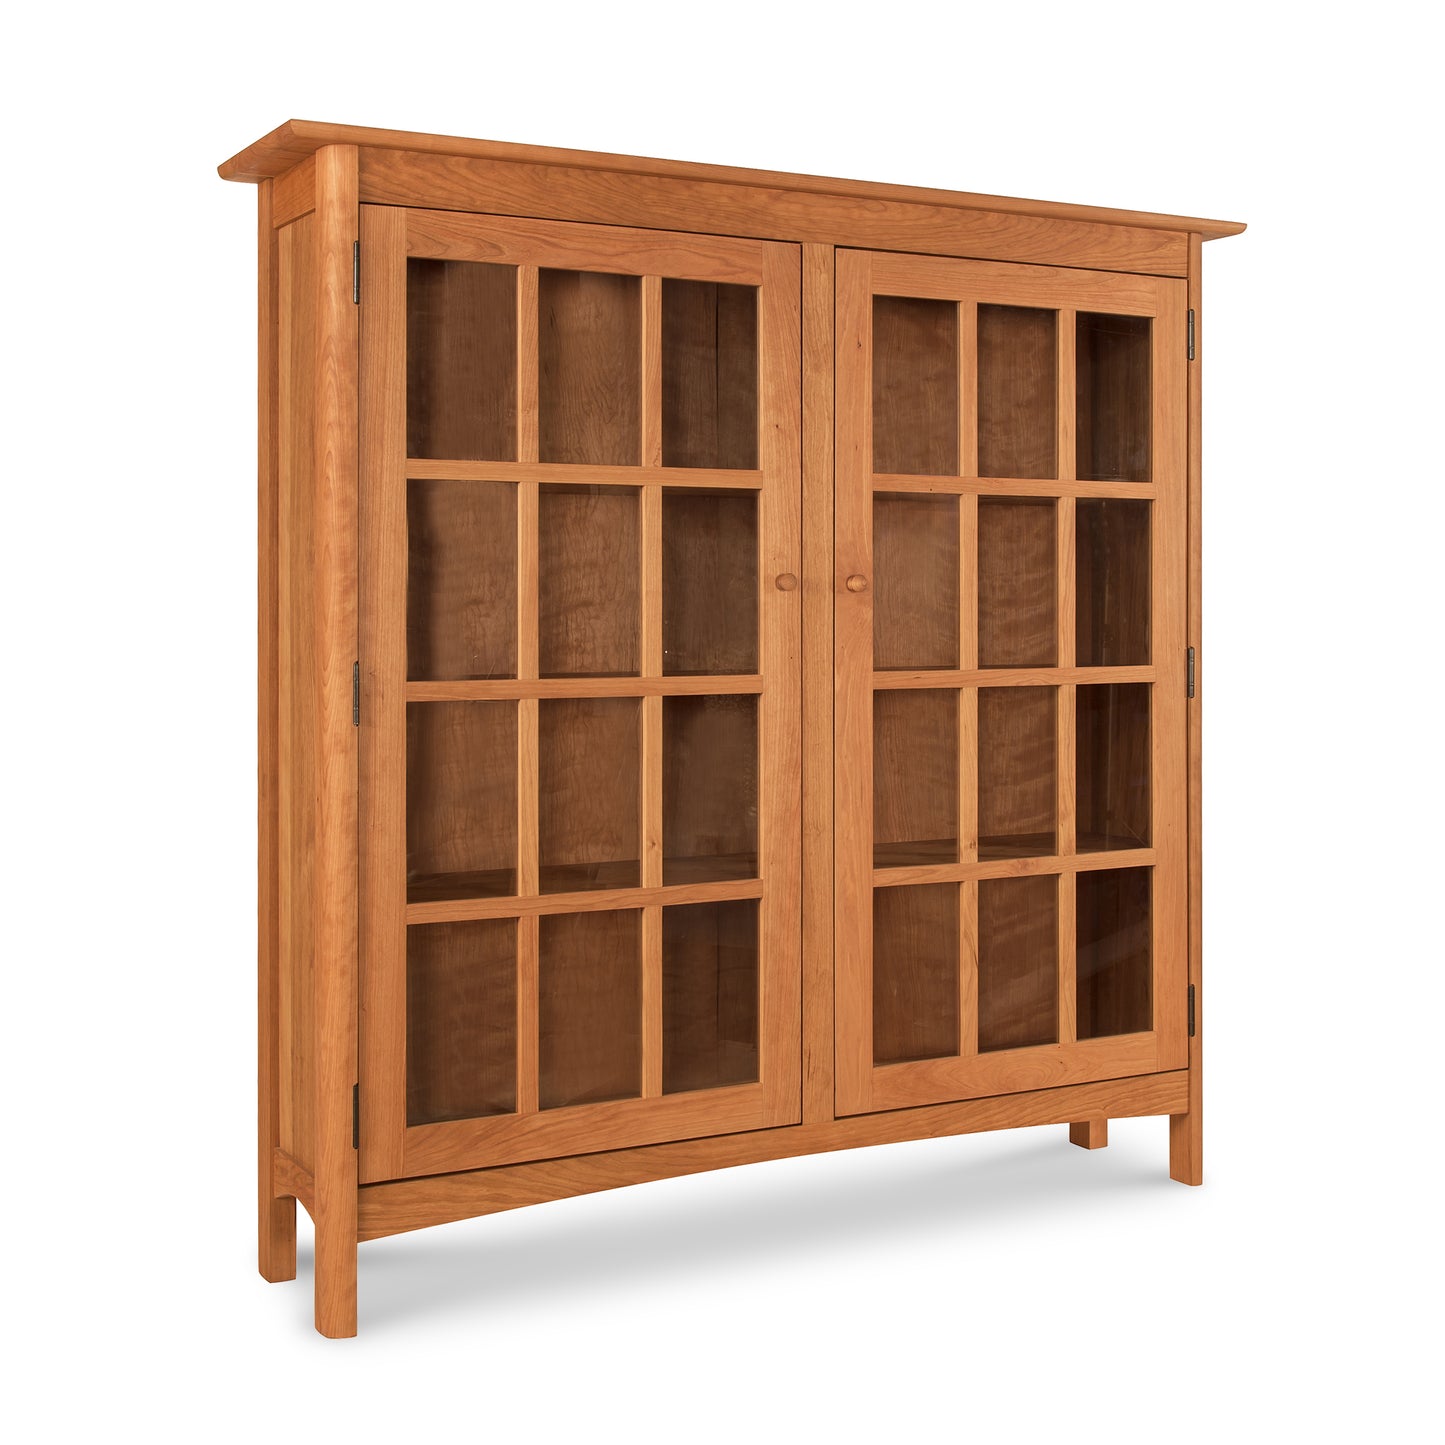 Heartwood Shaker 2-Glass Door Bookcase by Vermont Furniture Designs on a white background.